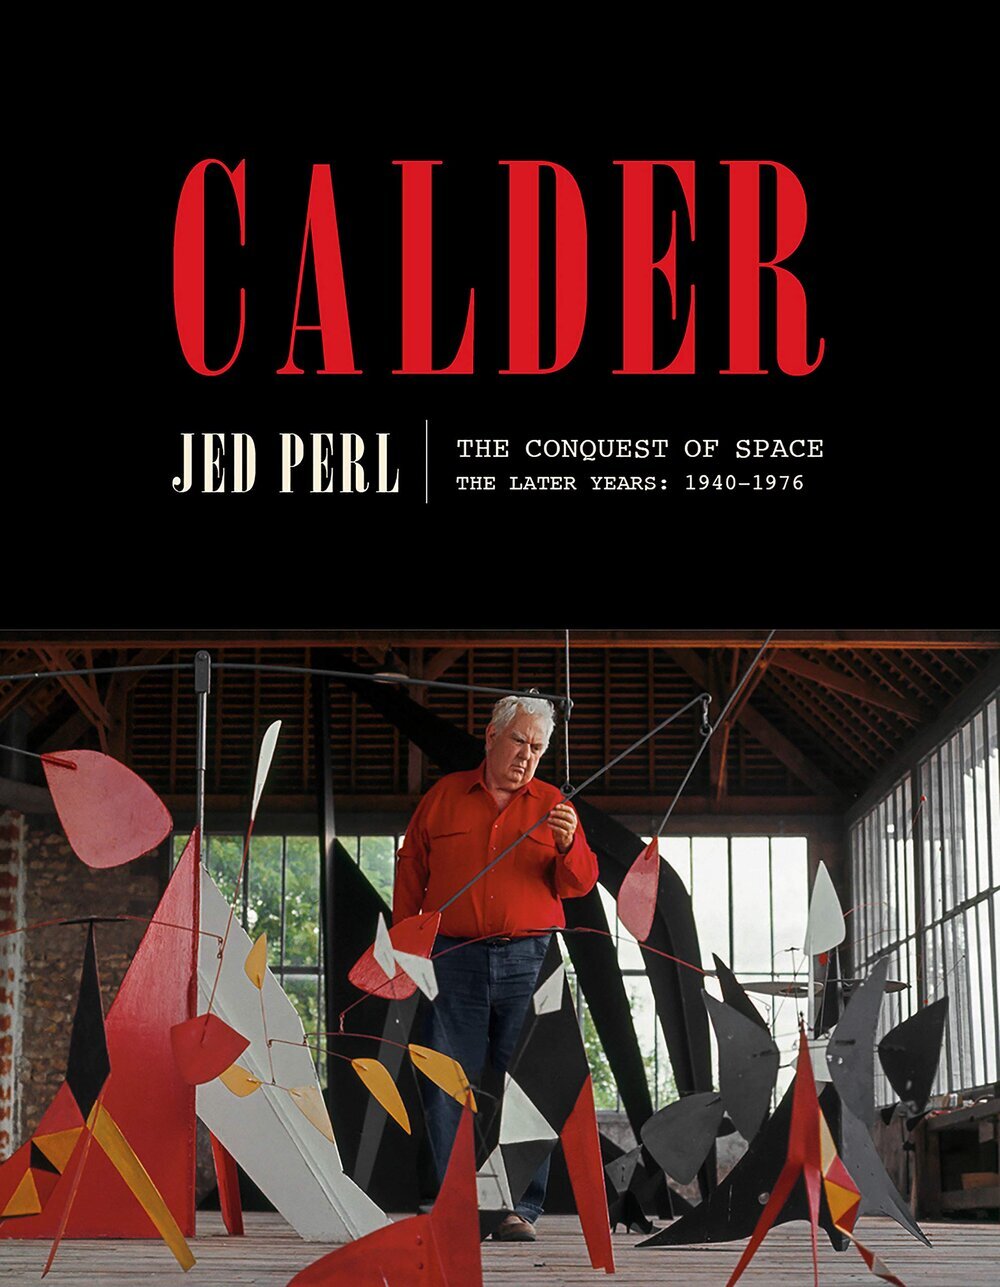 Best of Biography Calder The Conquest of Space The Later Years 1940-1976 by Jed Perl.jpg